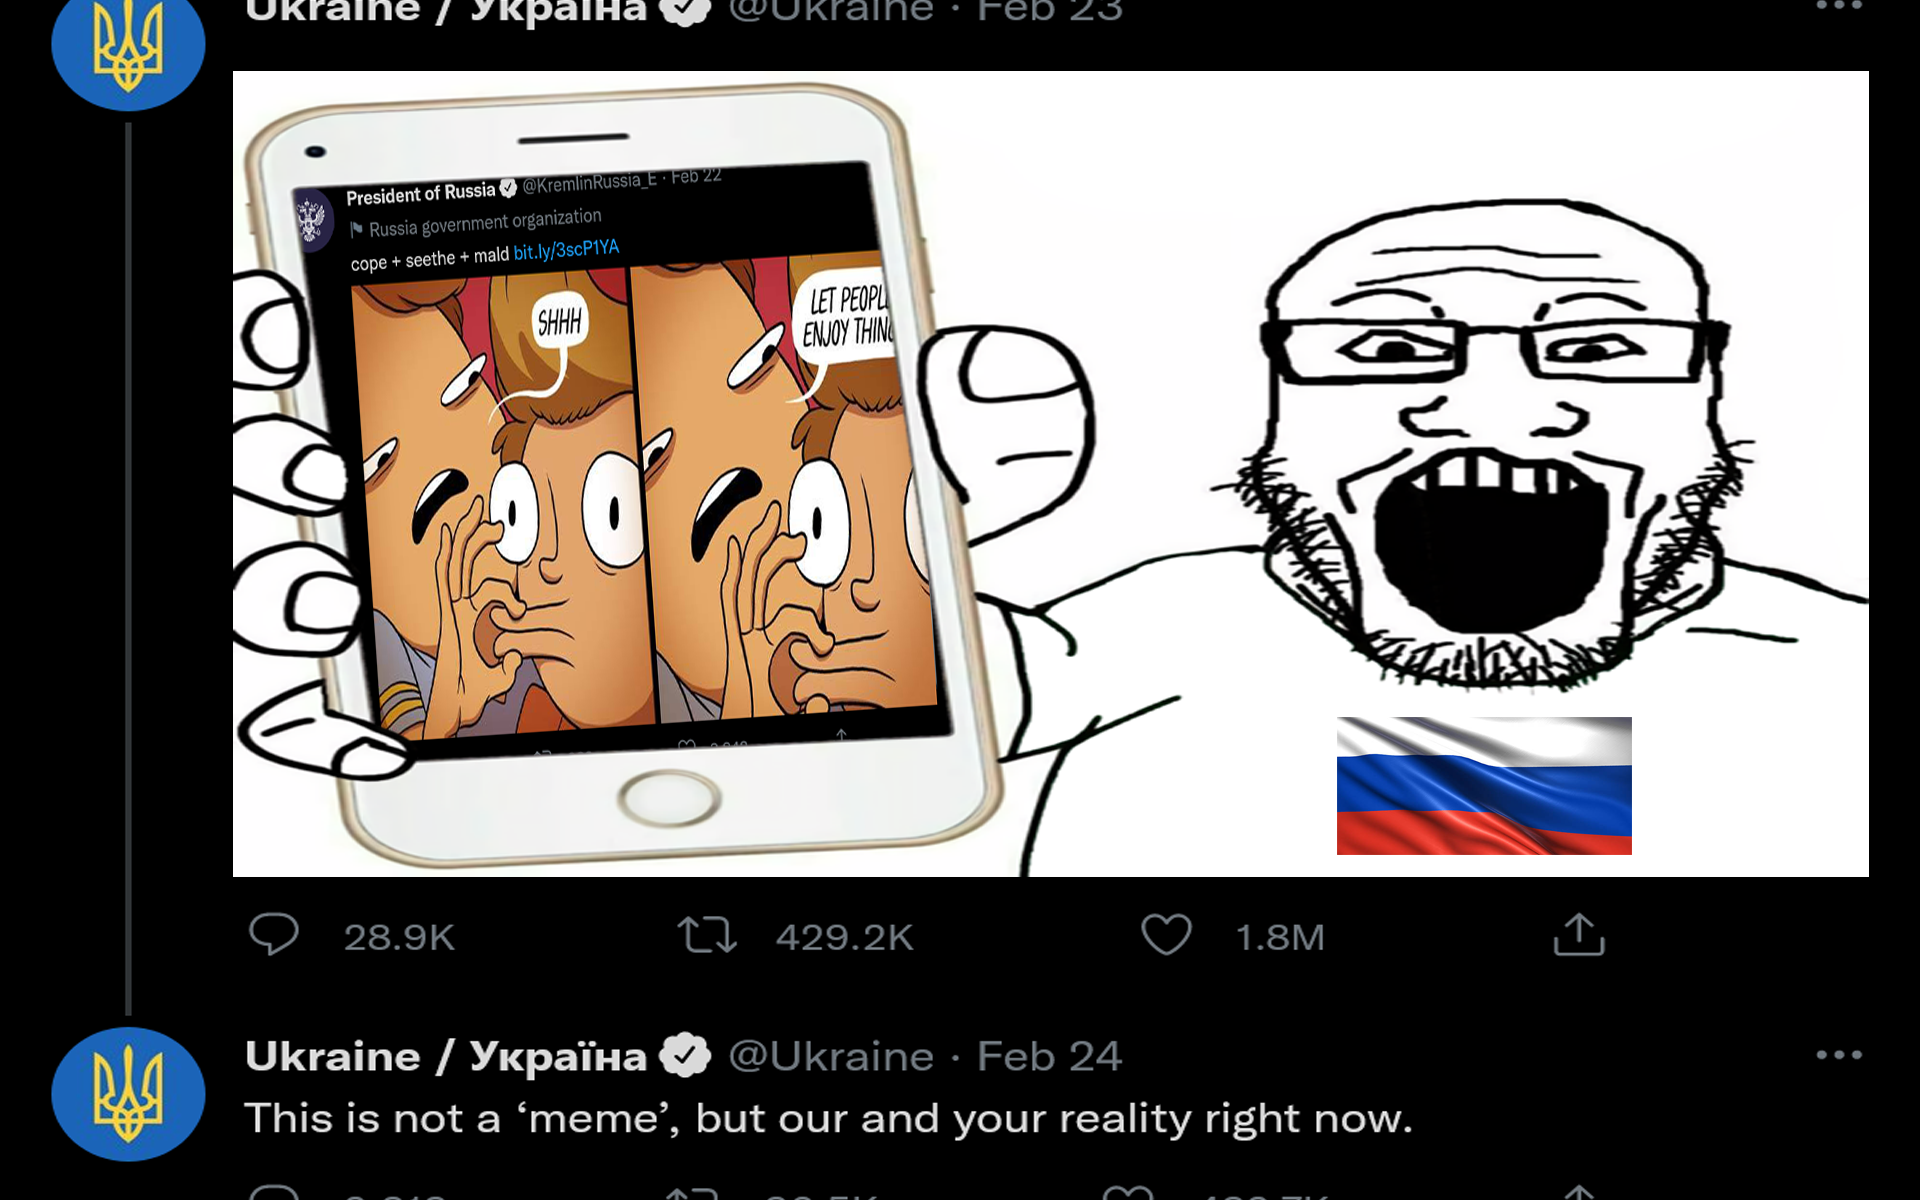 Ukraine Escalates Use Of Wojak Memes After Russia Posts "Let People Enjoy Things" Meme